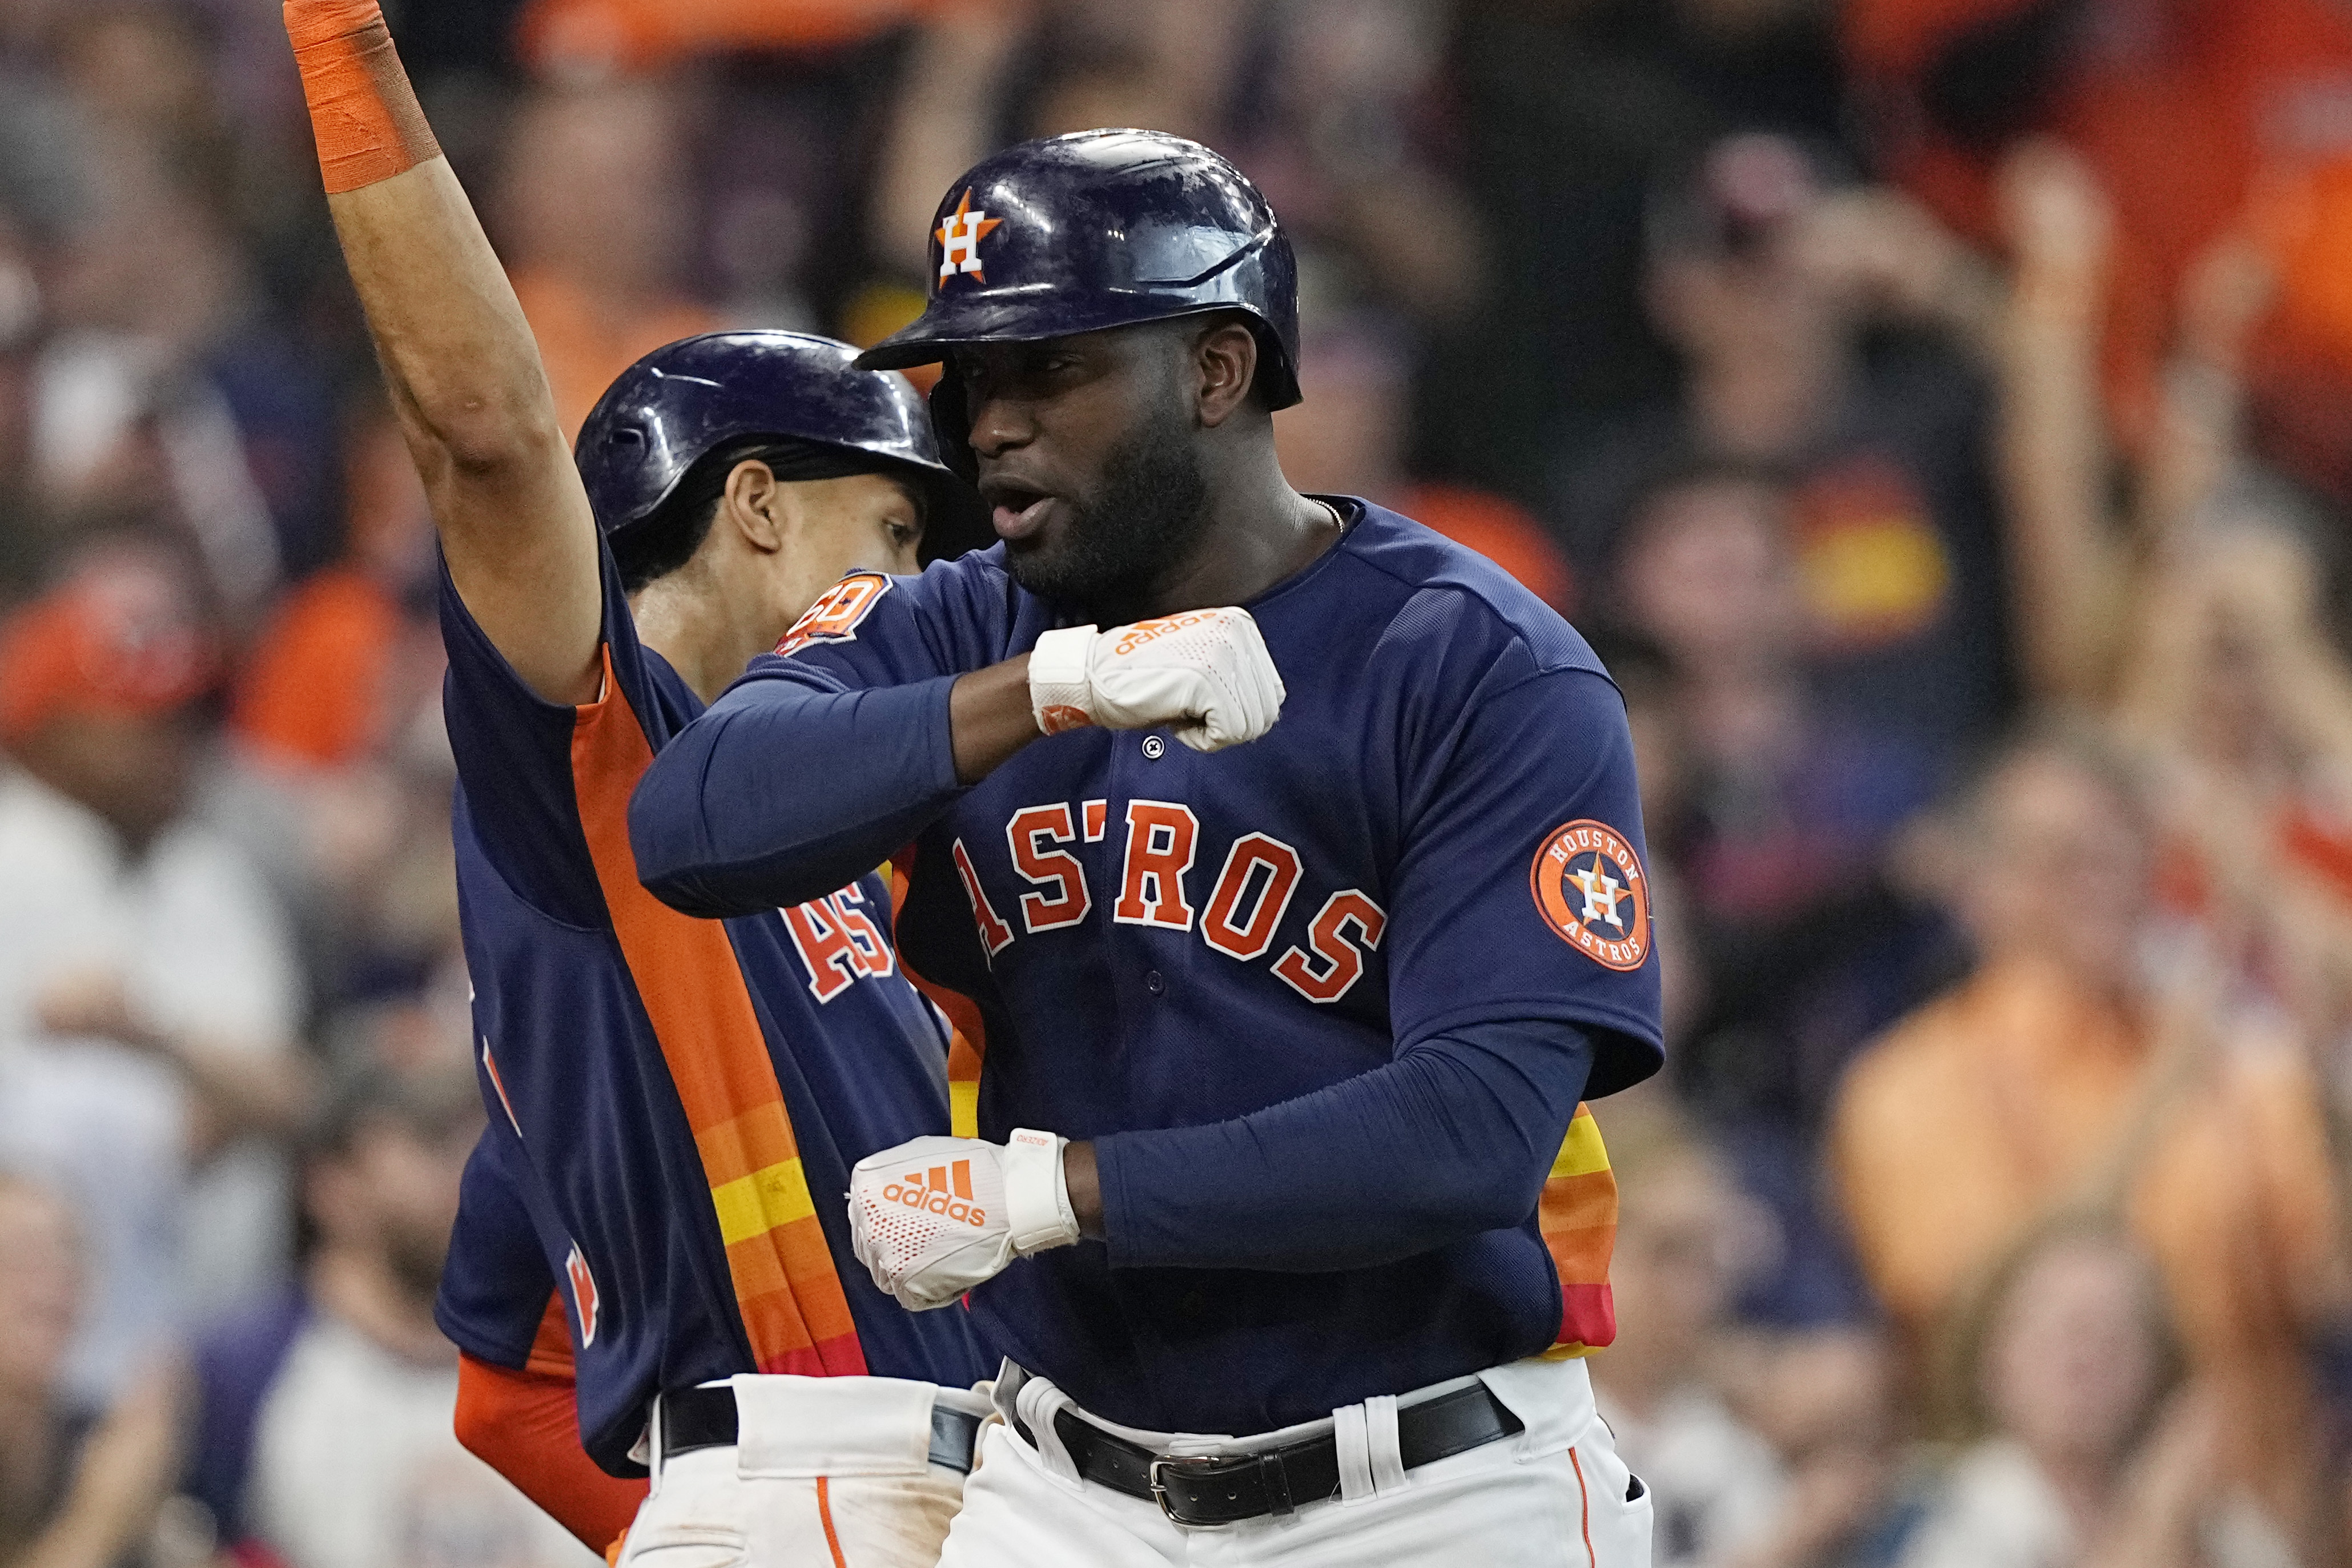 How to watch, stream, listen to Mariners vs. Astros in ALDS Game 3